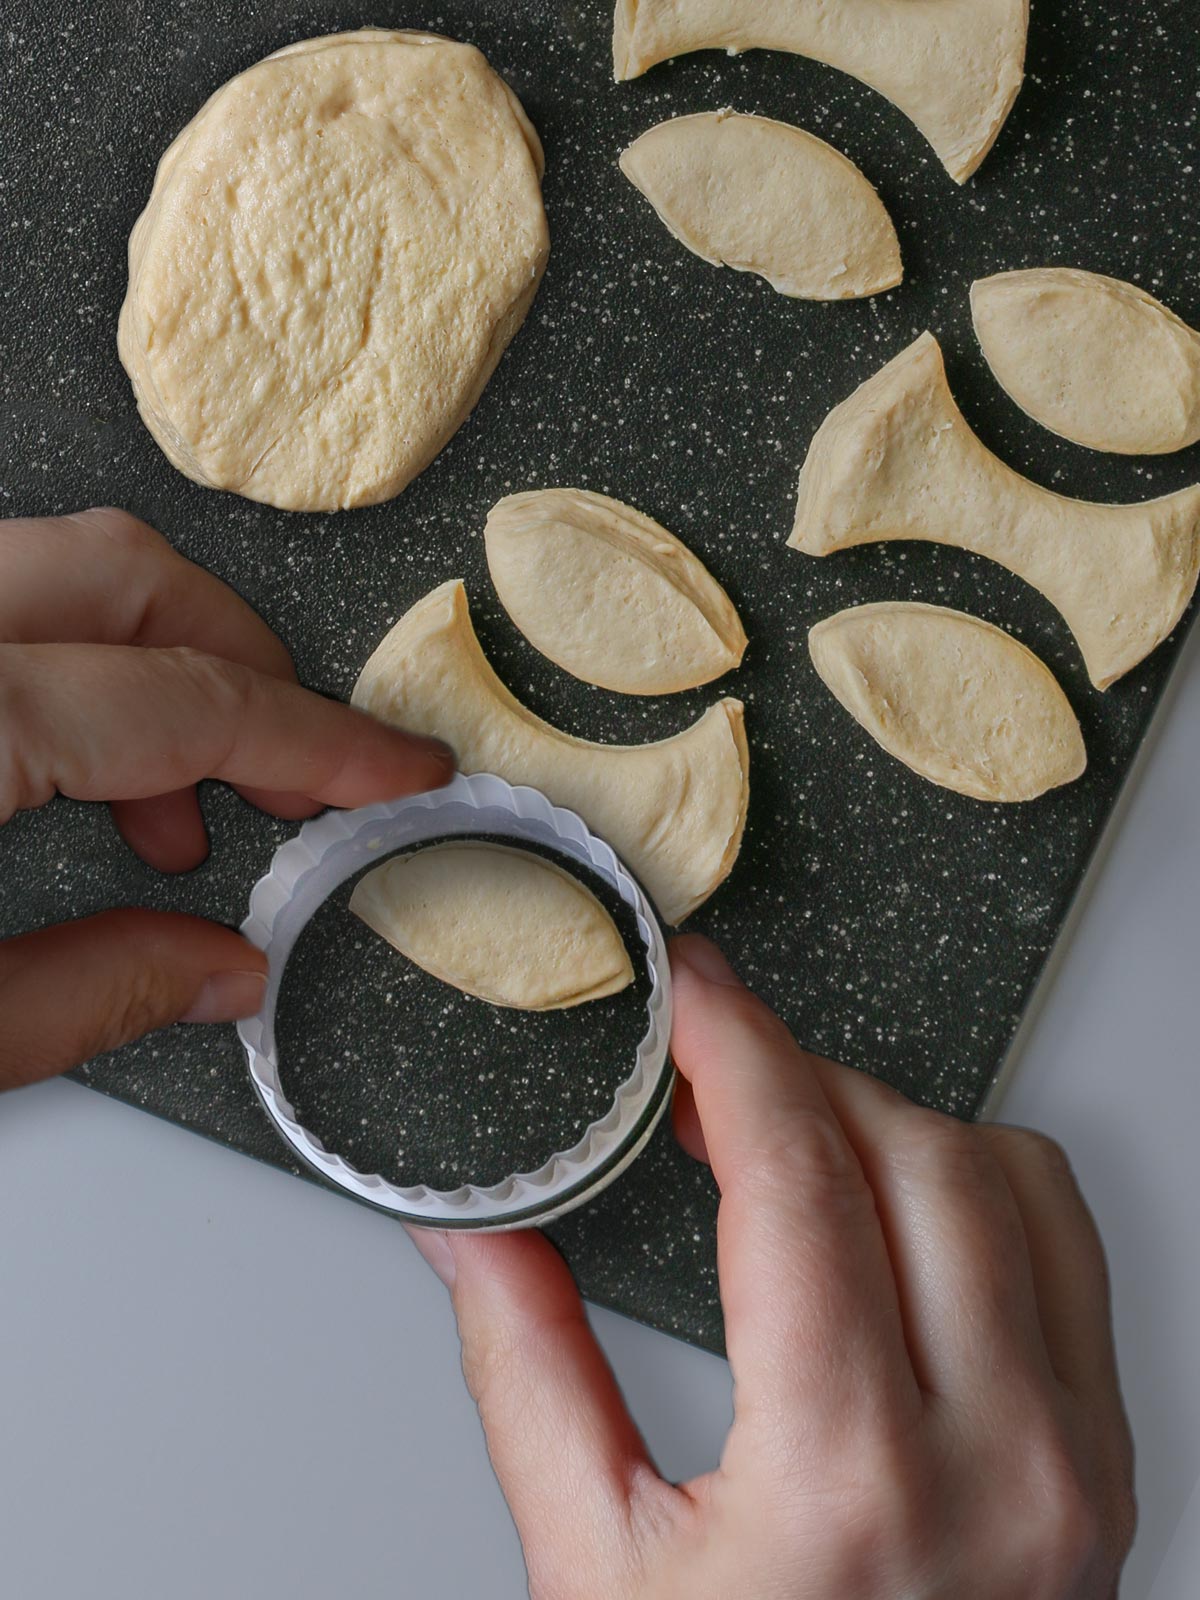 cutting biscuits into shapes with biscuit cutter.